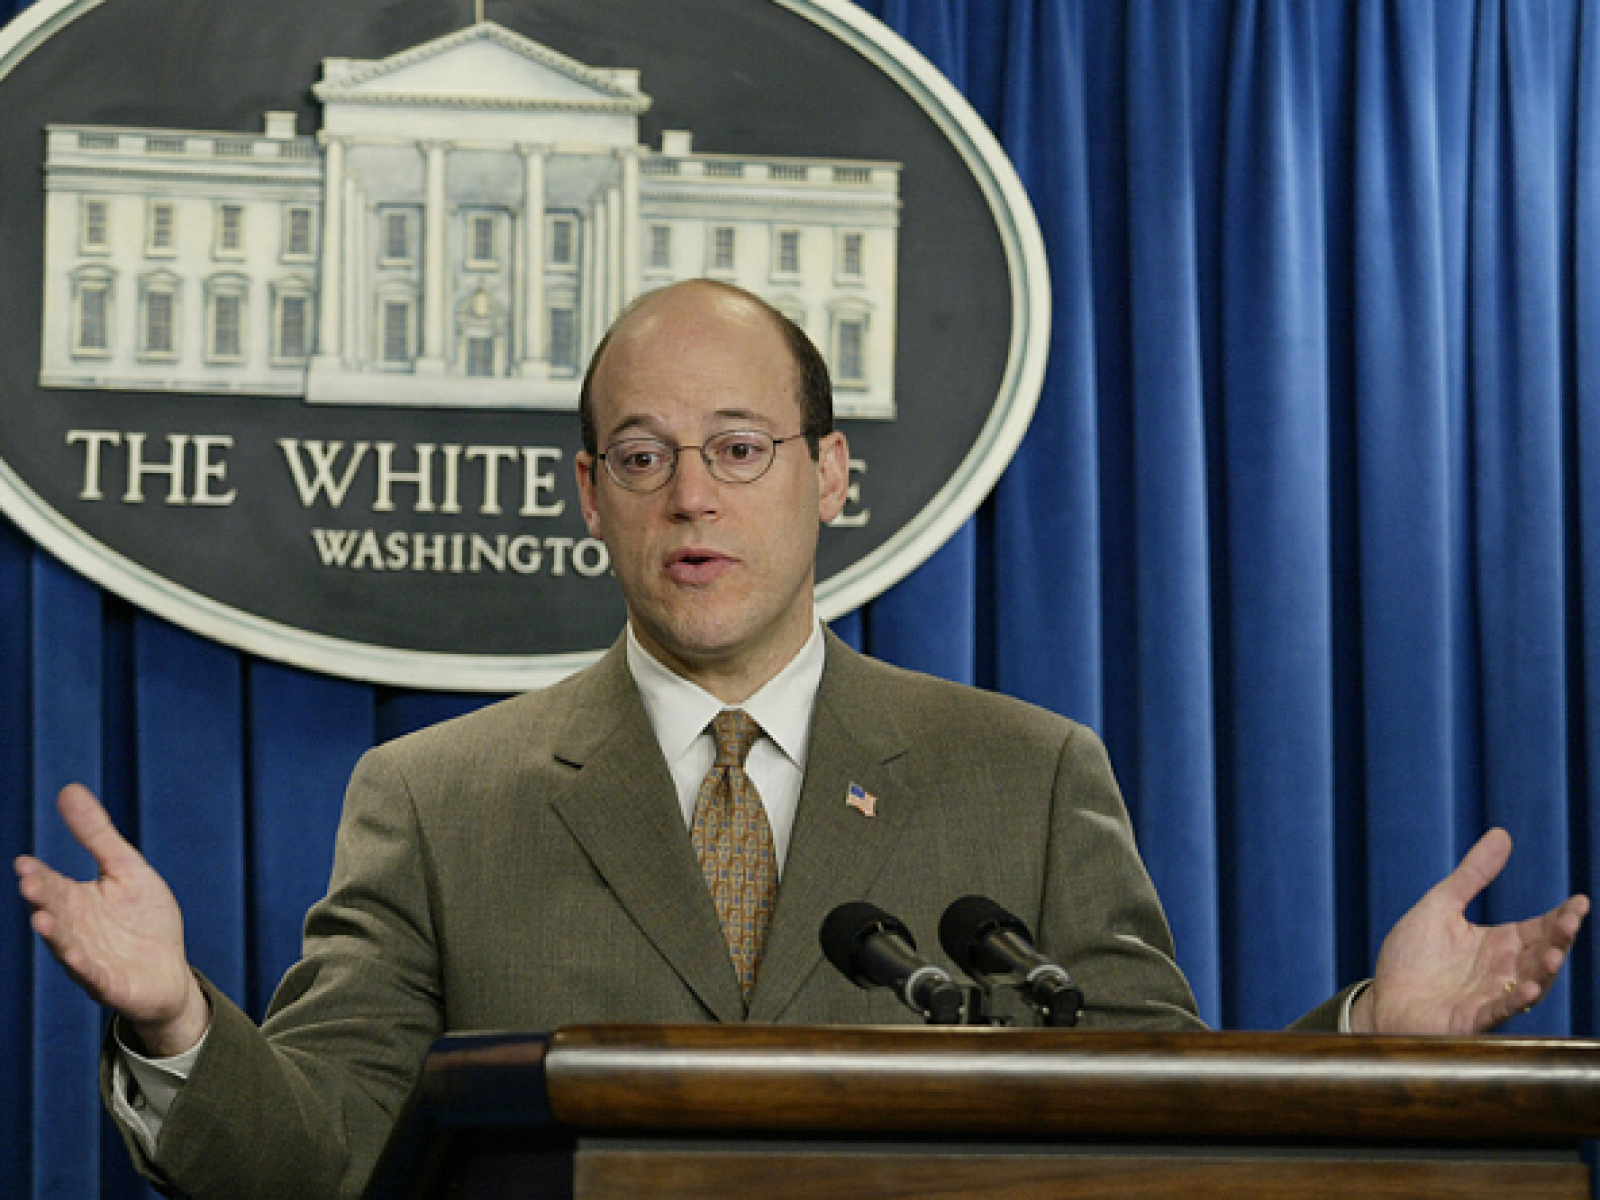 Young Ari Fleischer wearing a suit as he speaking into two microphones at the White House